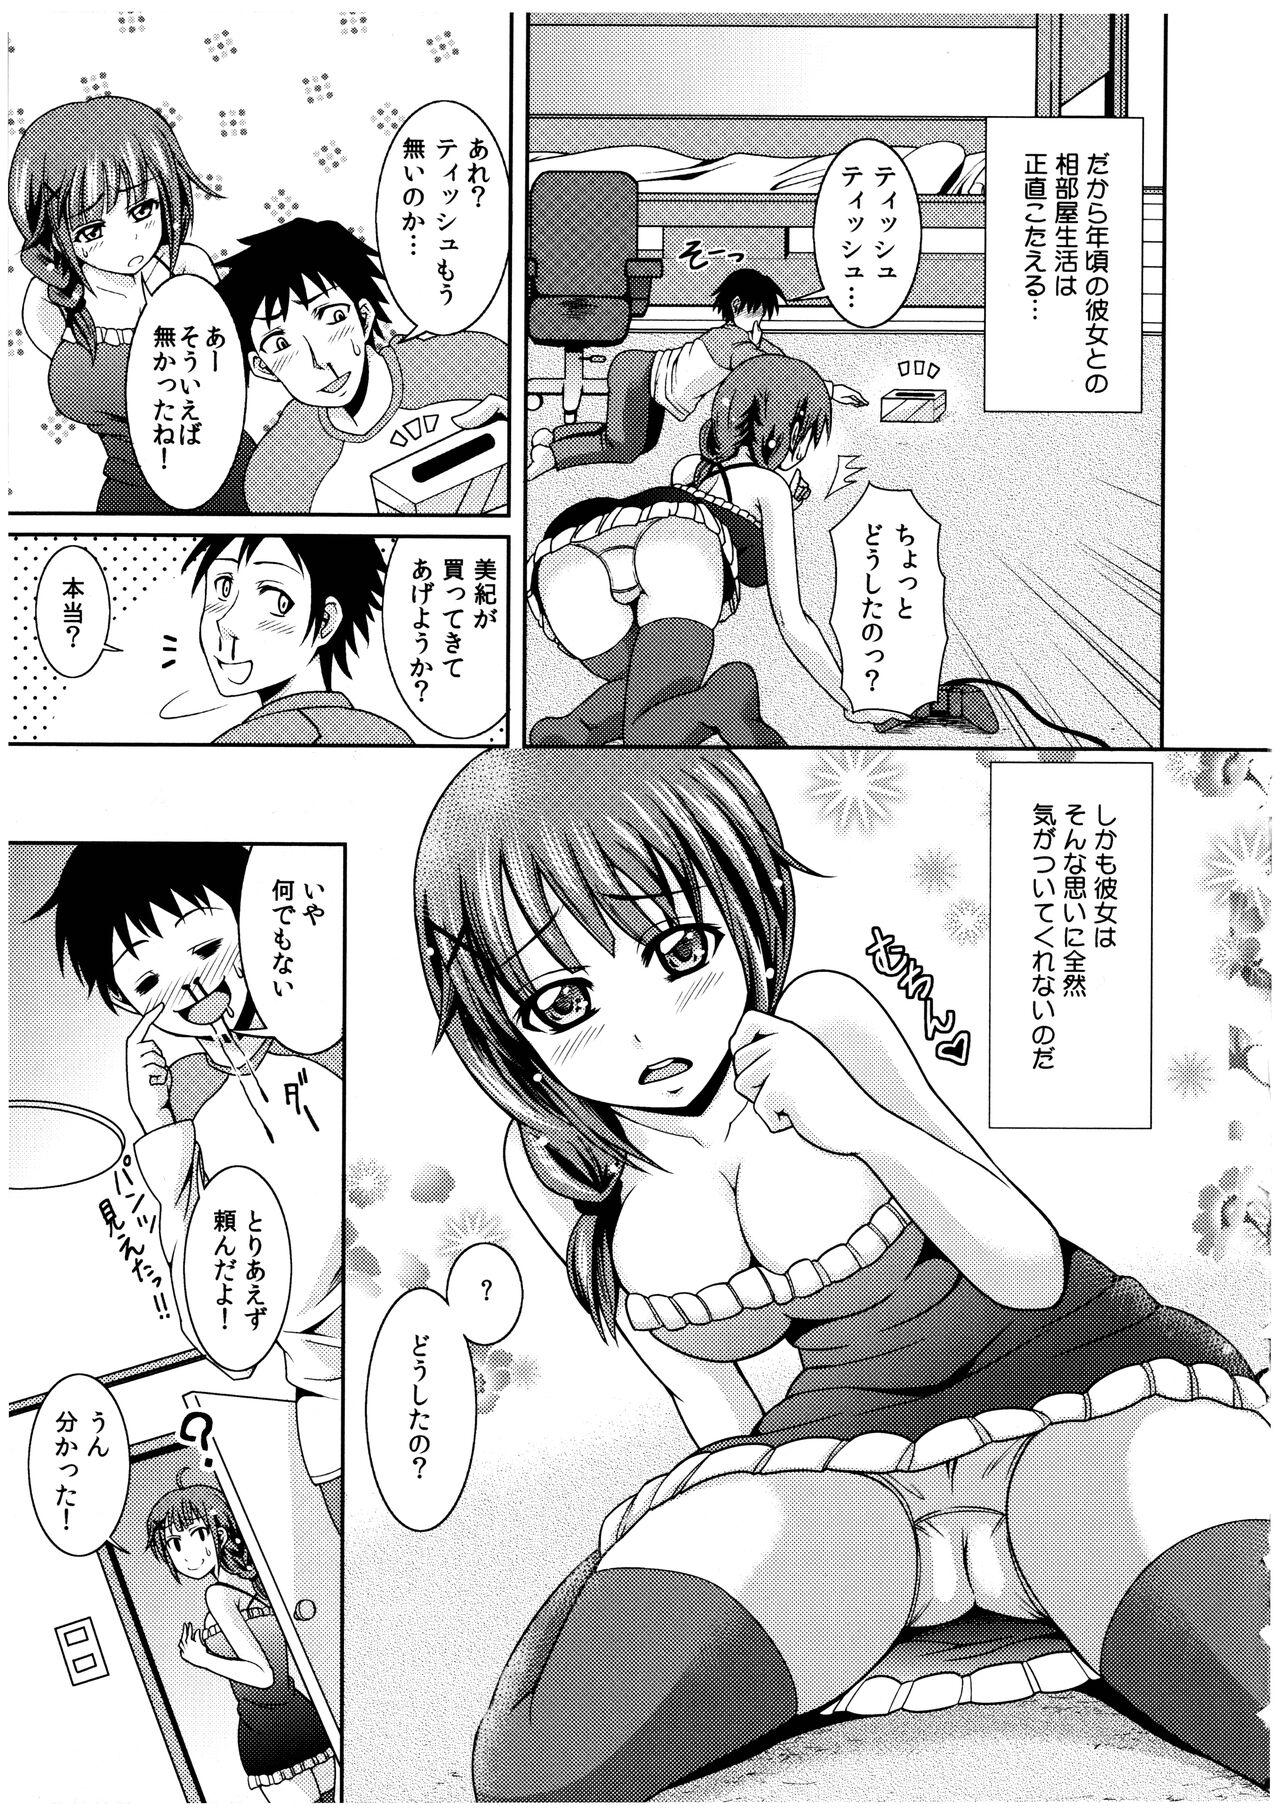 Gapes Gaping Asshole Oniichan Socchi Itte Ii? Step - Page 6